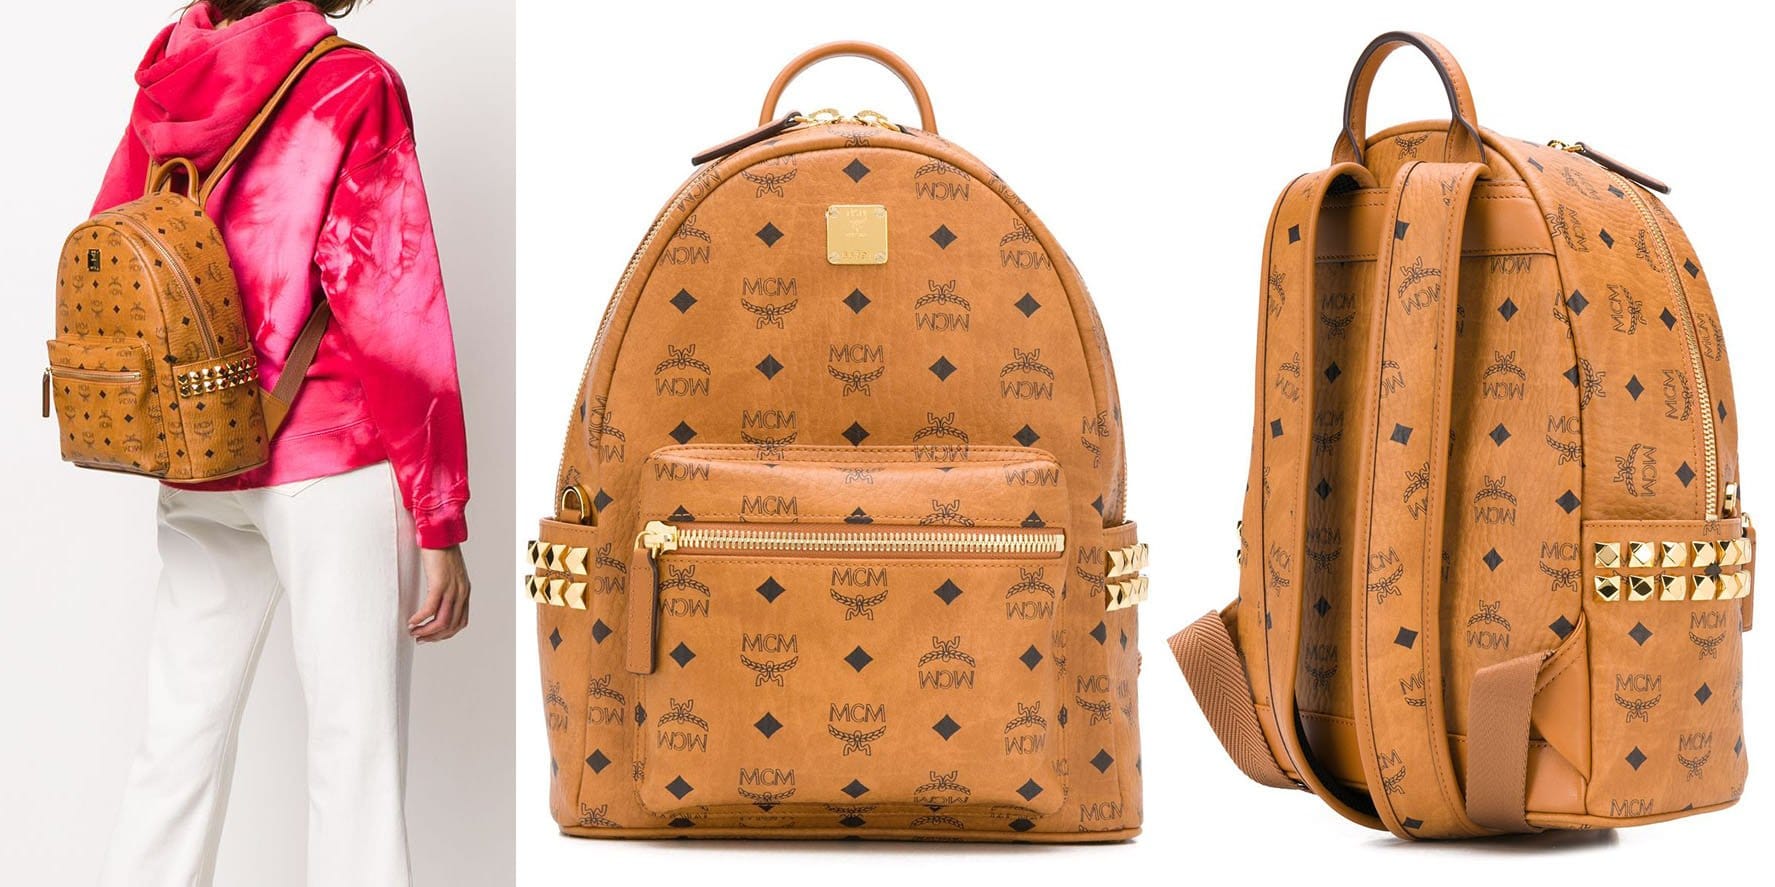 Gold-tone studs and MCM's monogram print add contemporary vibe to this vintage-inspired cognac leather backpack